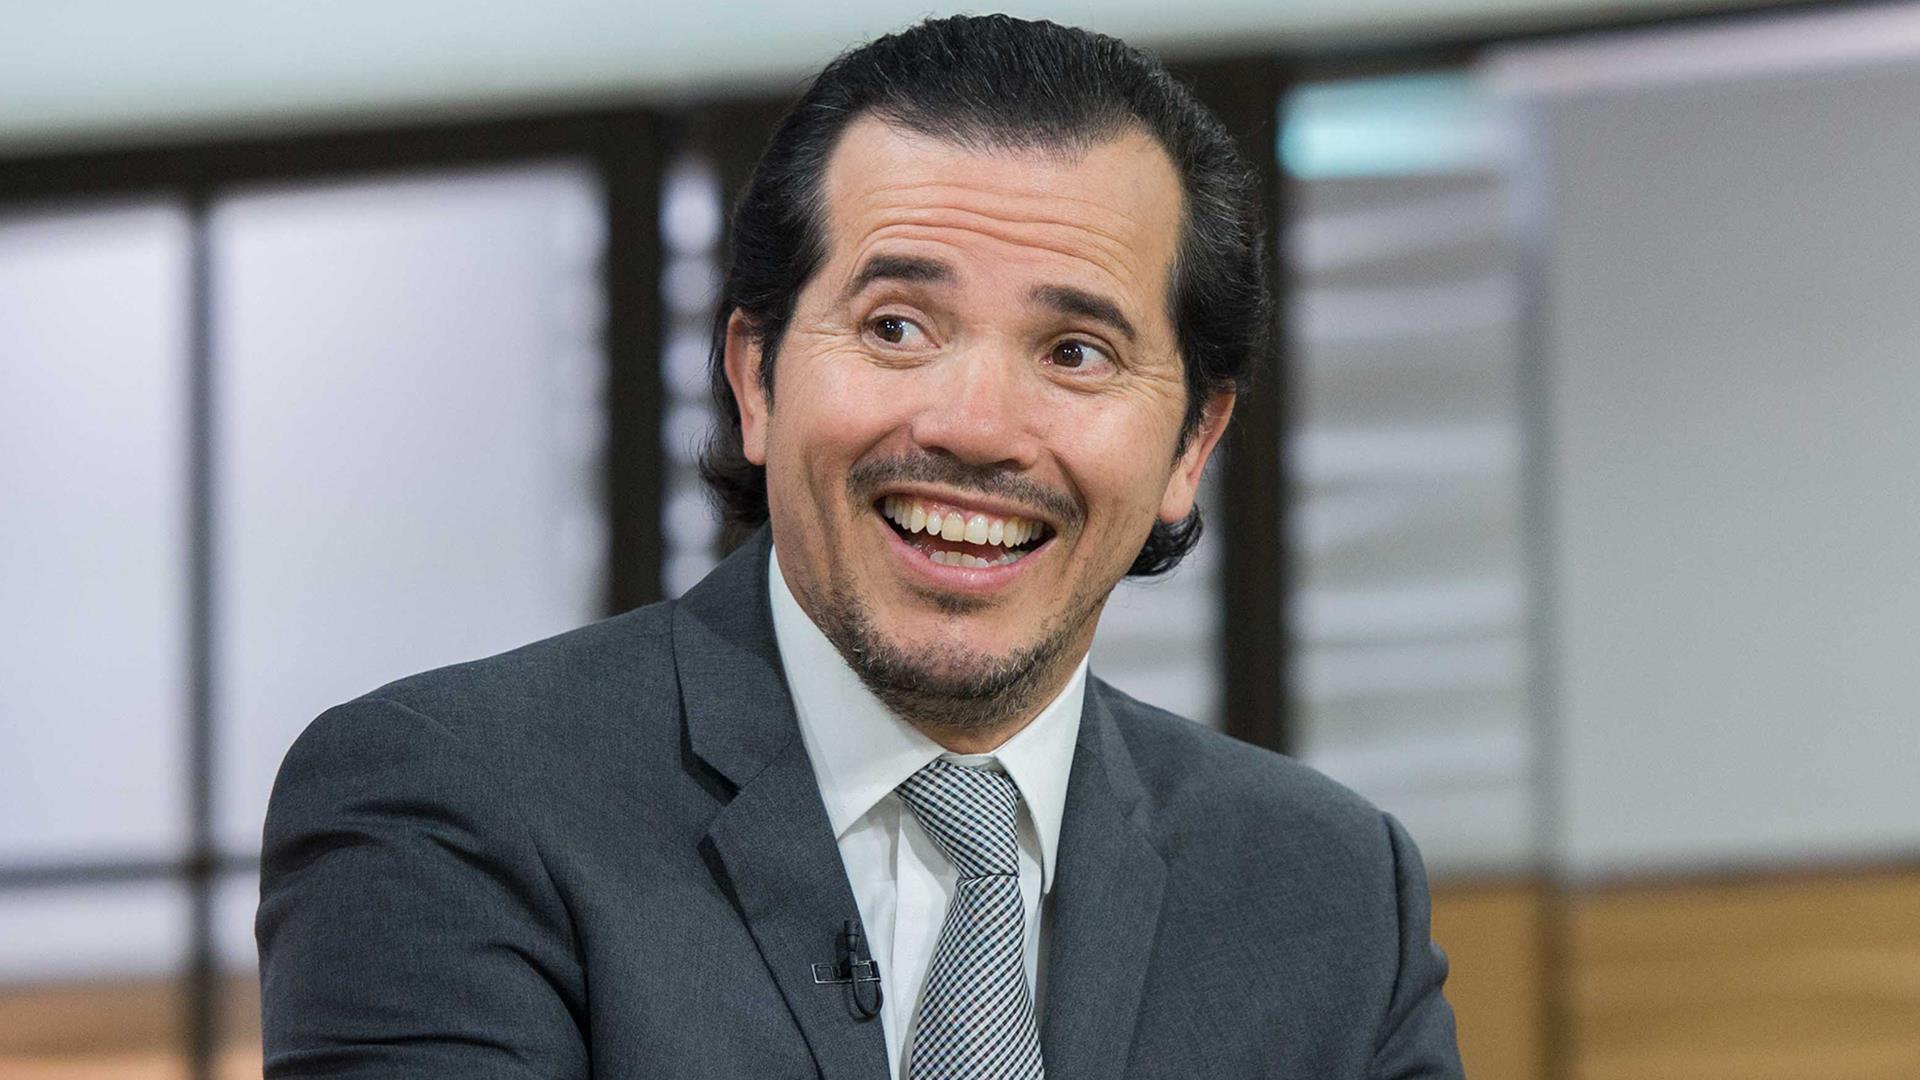 John Leguizamo Reveals Big Roles He Passed On: Why He Skipped 'Happy Feet' and More Blockbusters